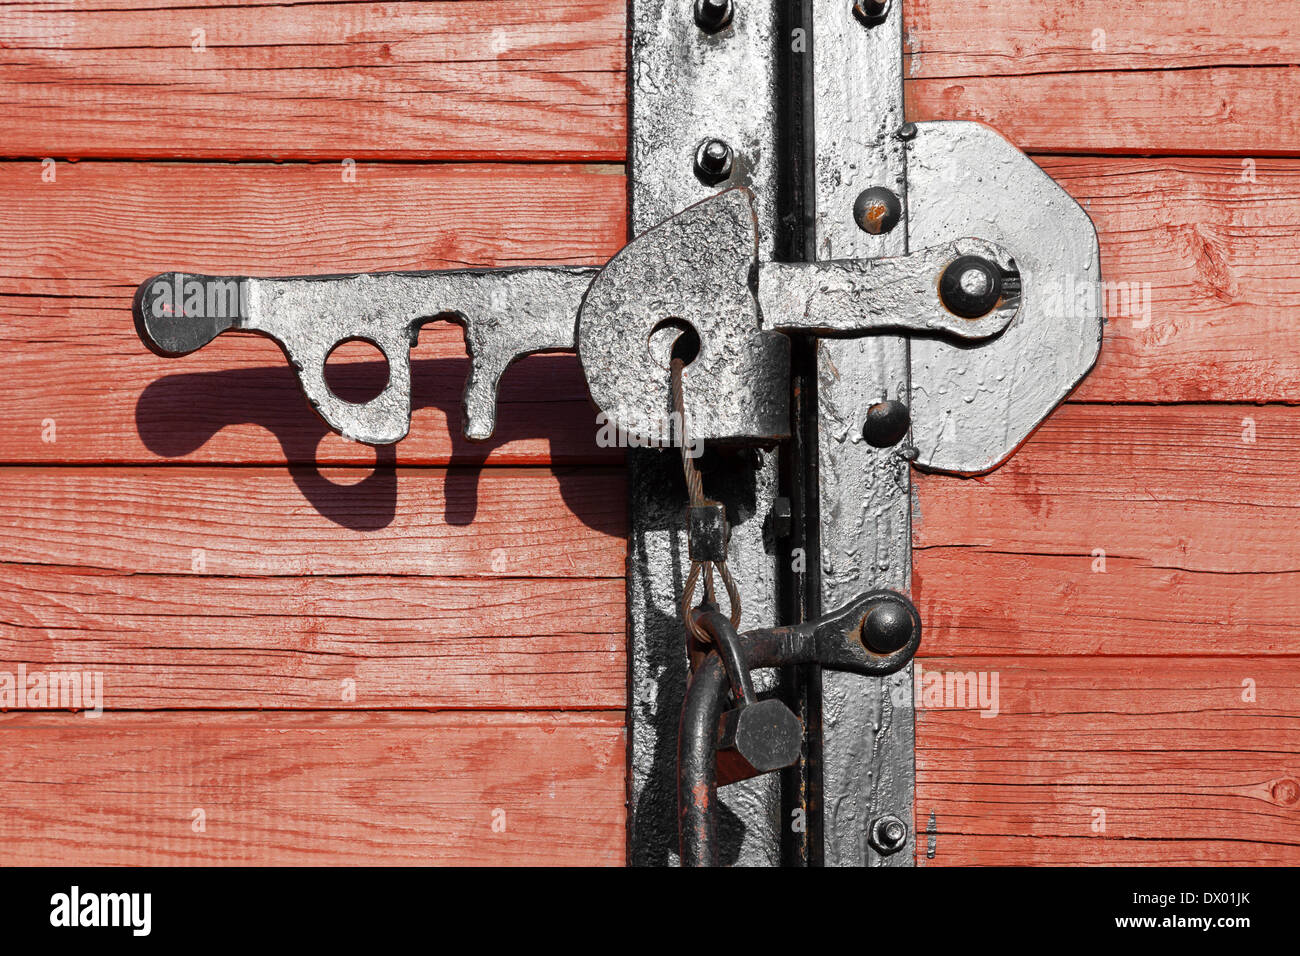 Closeup of a vintage wooden latch on a building Stock Photo